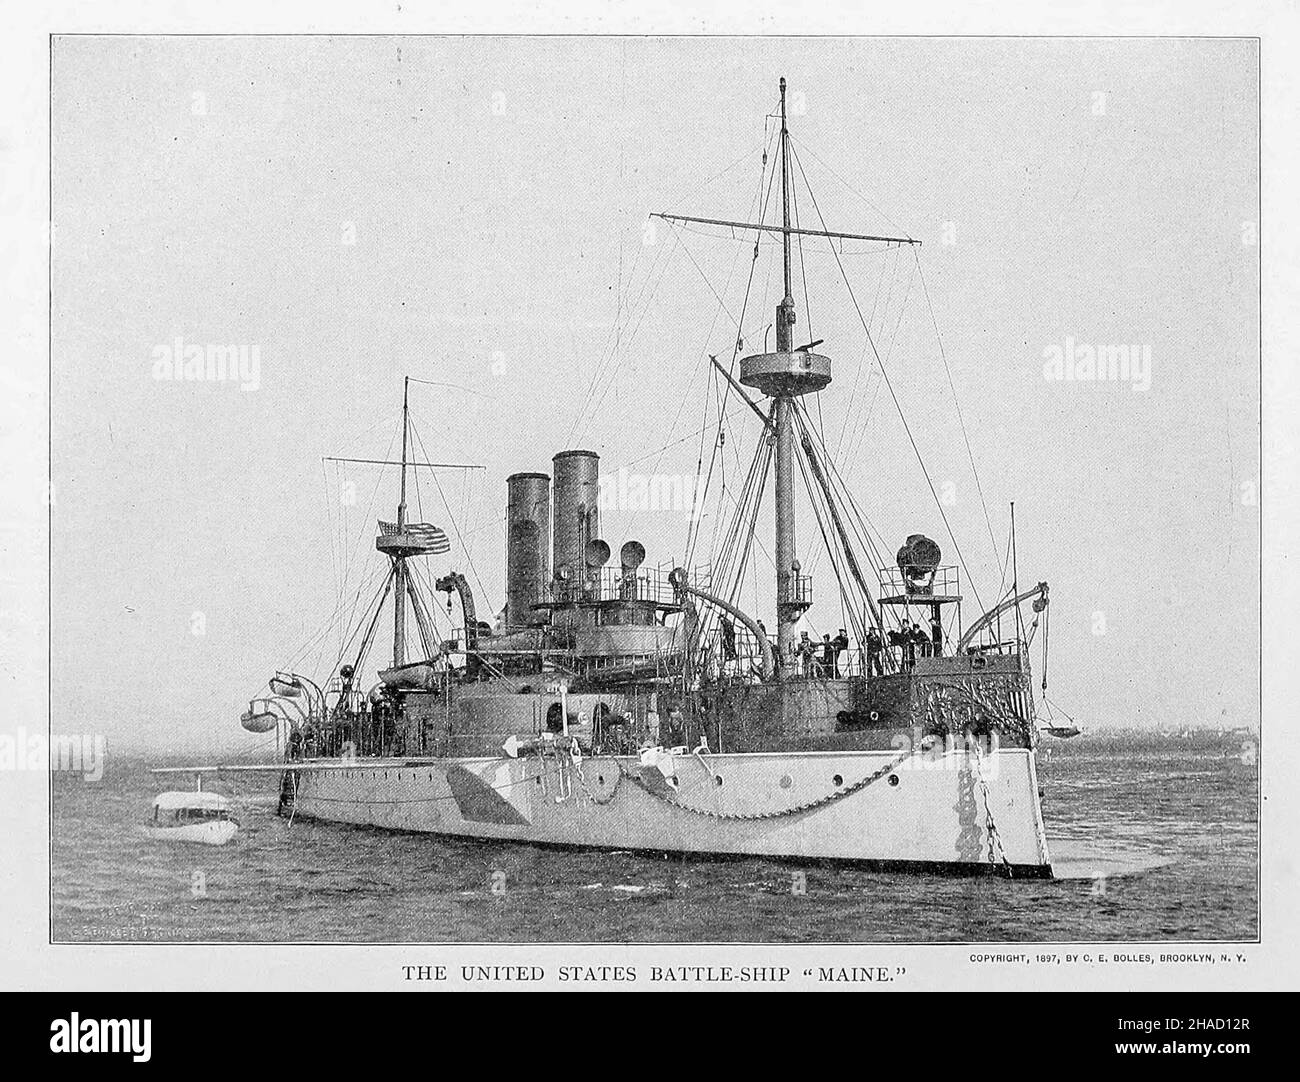 The United States Battle-Ship Maine from ' The book of the ocean ' by Ernest Ingersoll, Publication date 1898 Publisher: New York, The Century co. Topics include The ocean and its origin.-- Waves, tides, and currents.--The building and rigging of ships.--Early voyages and exploration.--Secrets won from the frozen North.--War-ships and naval battles.--The merchants of the sea.--Robbers of the seas.--Yachting and pleasure-boating.--Dangers of the deep.-- Fishing and other marine industries.--The plants of the sea and their uses.--Animal life in the sea Stock Photo